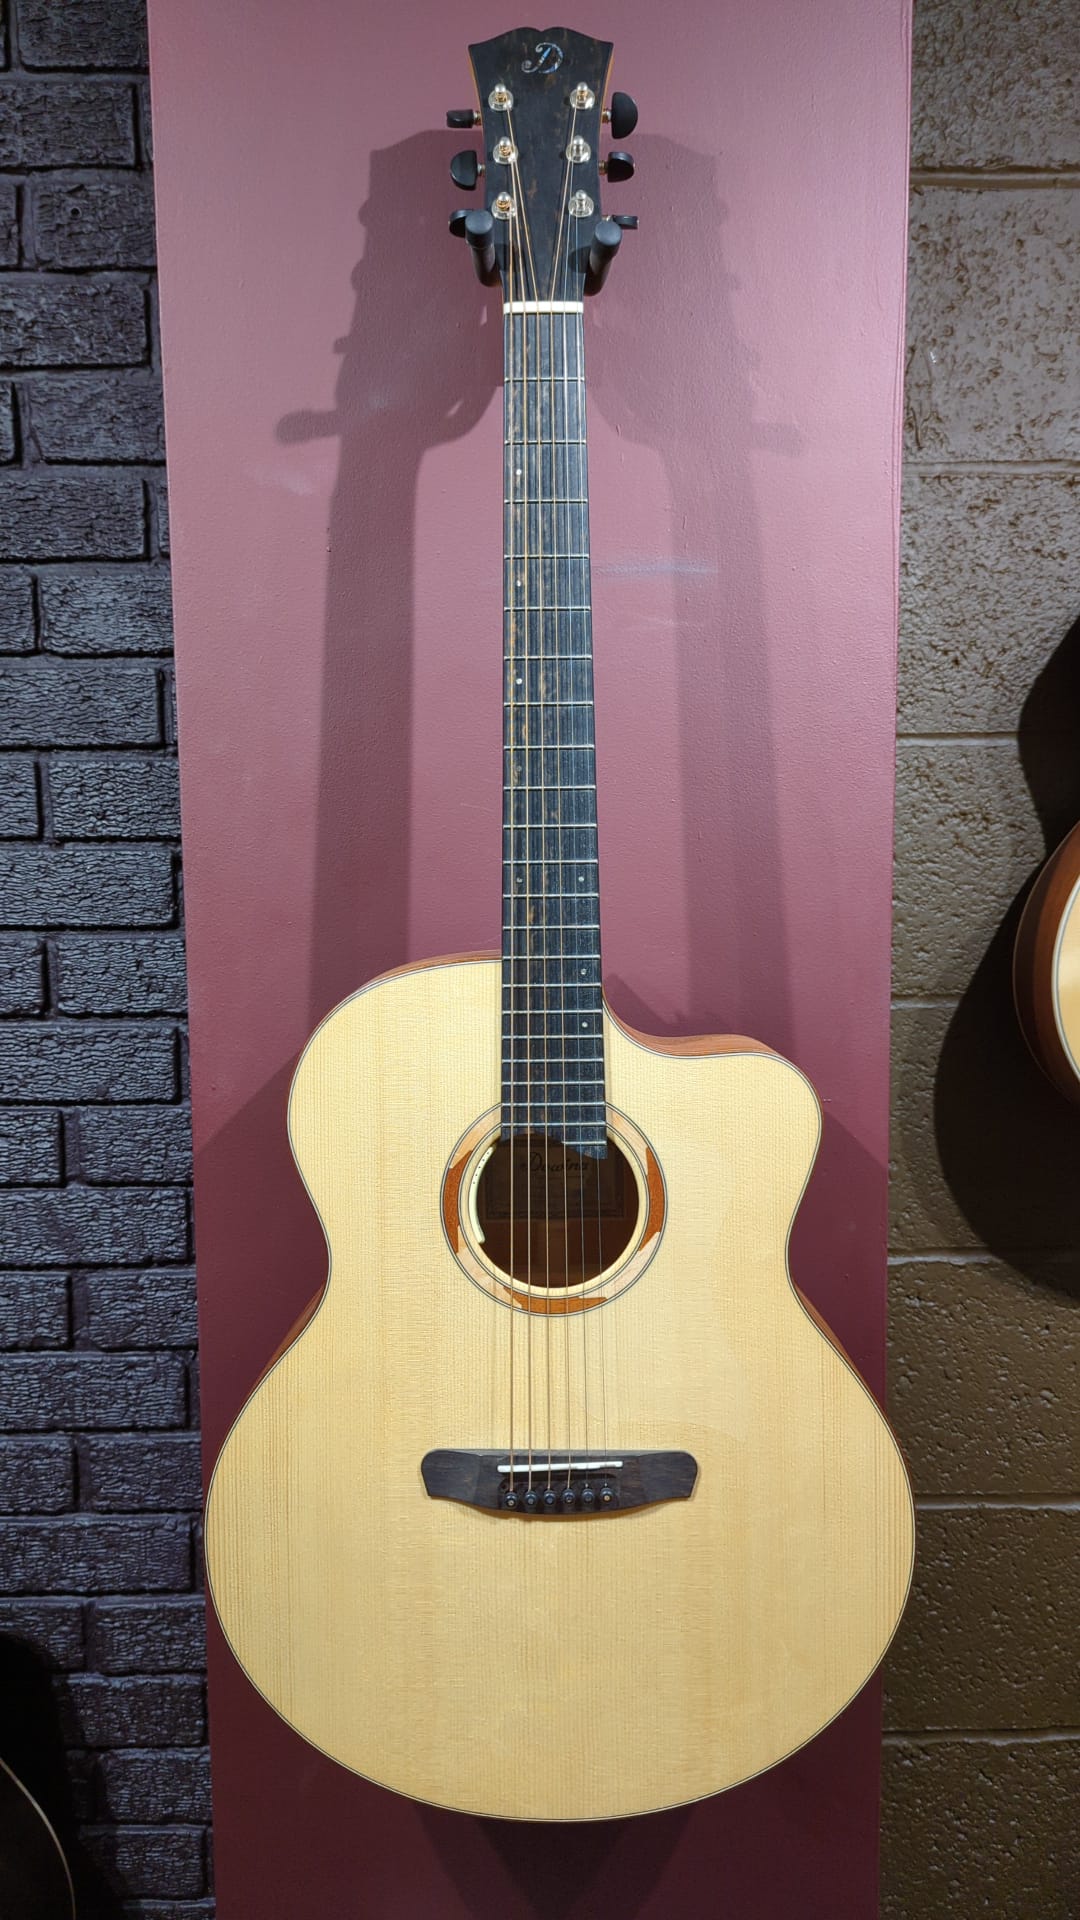 Dowina Mahogany (Pomona) JC-DS with LR Baggs Anthem [B-stock], Acoustic Guitar for sale at Richards Guitars.